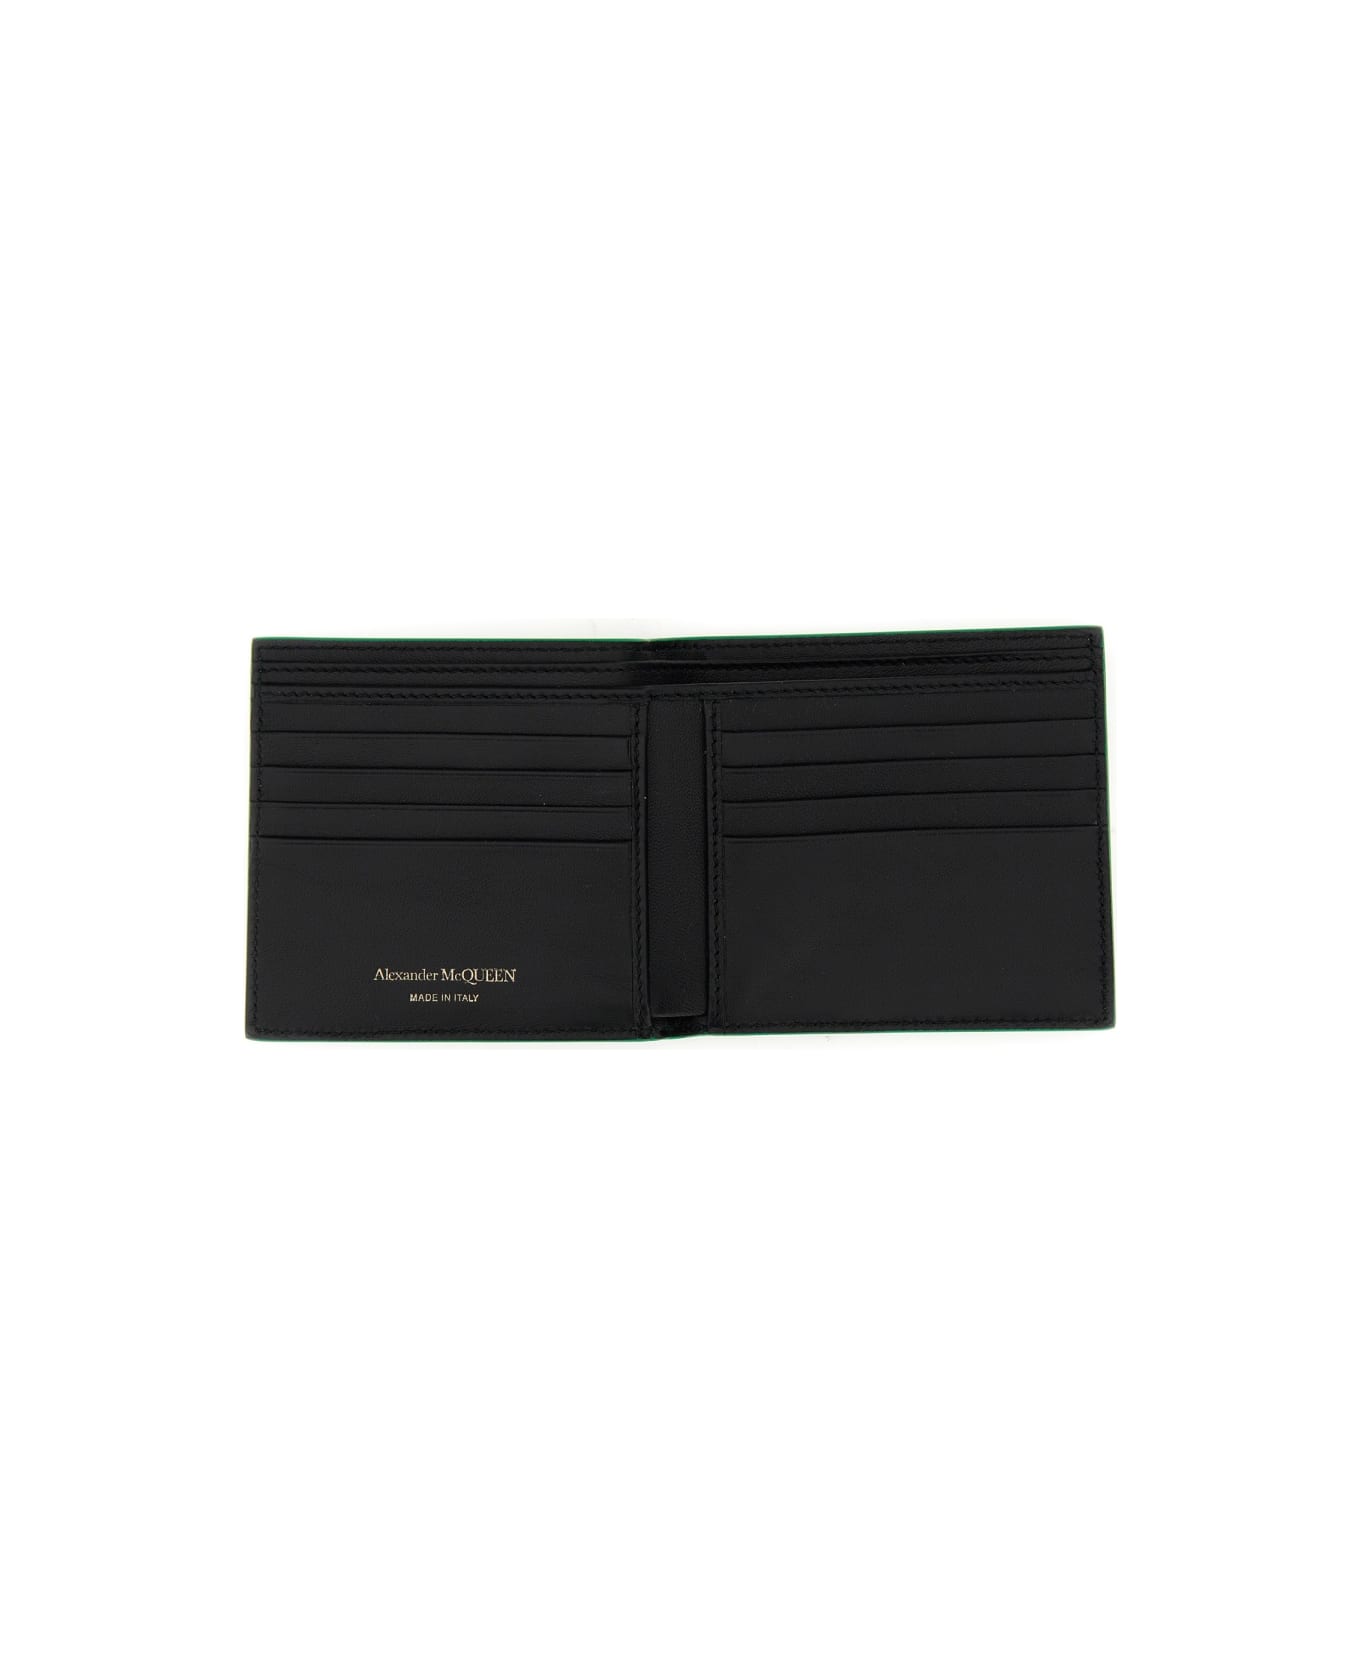 Alexander McQueen Leather Wallet With Logo - GREEN